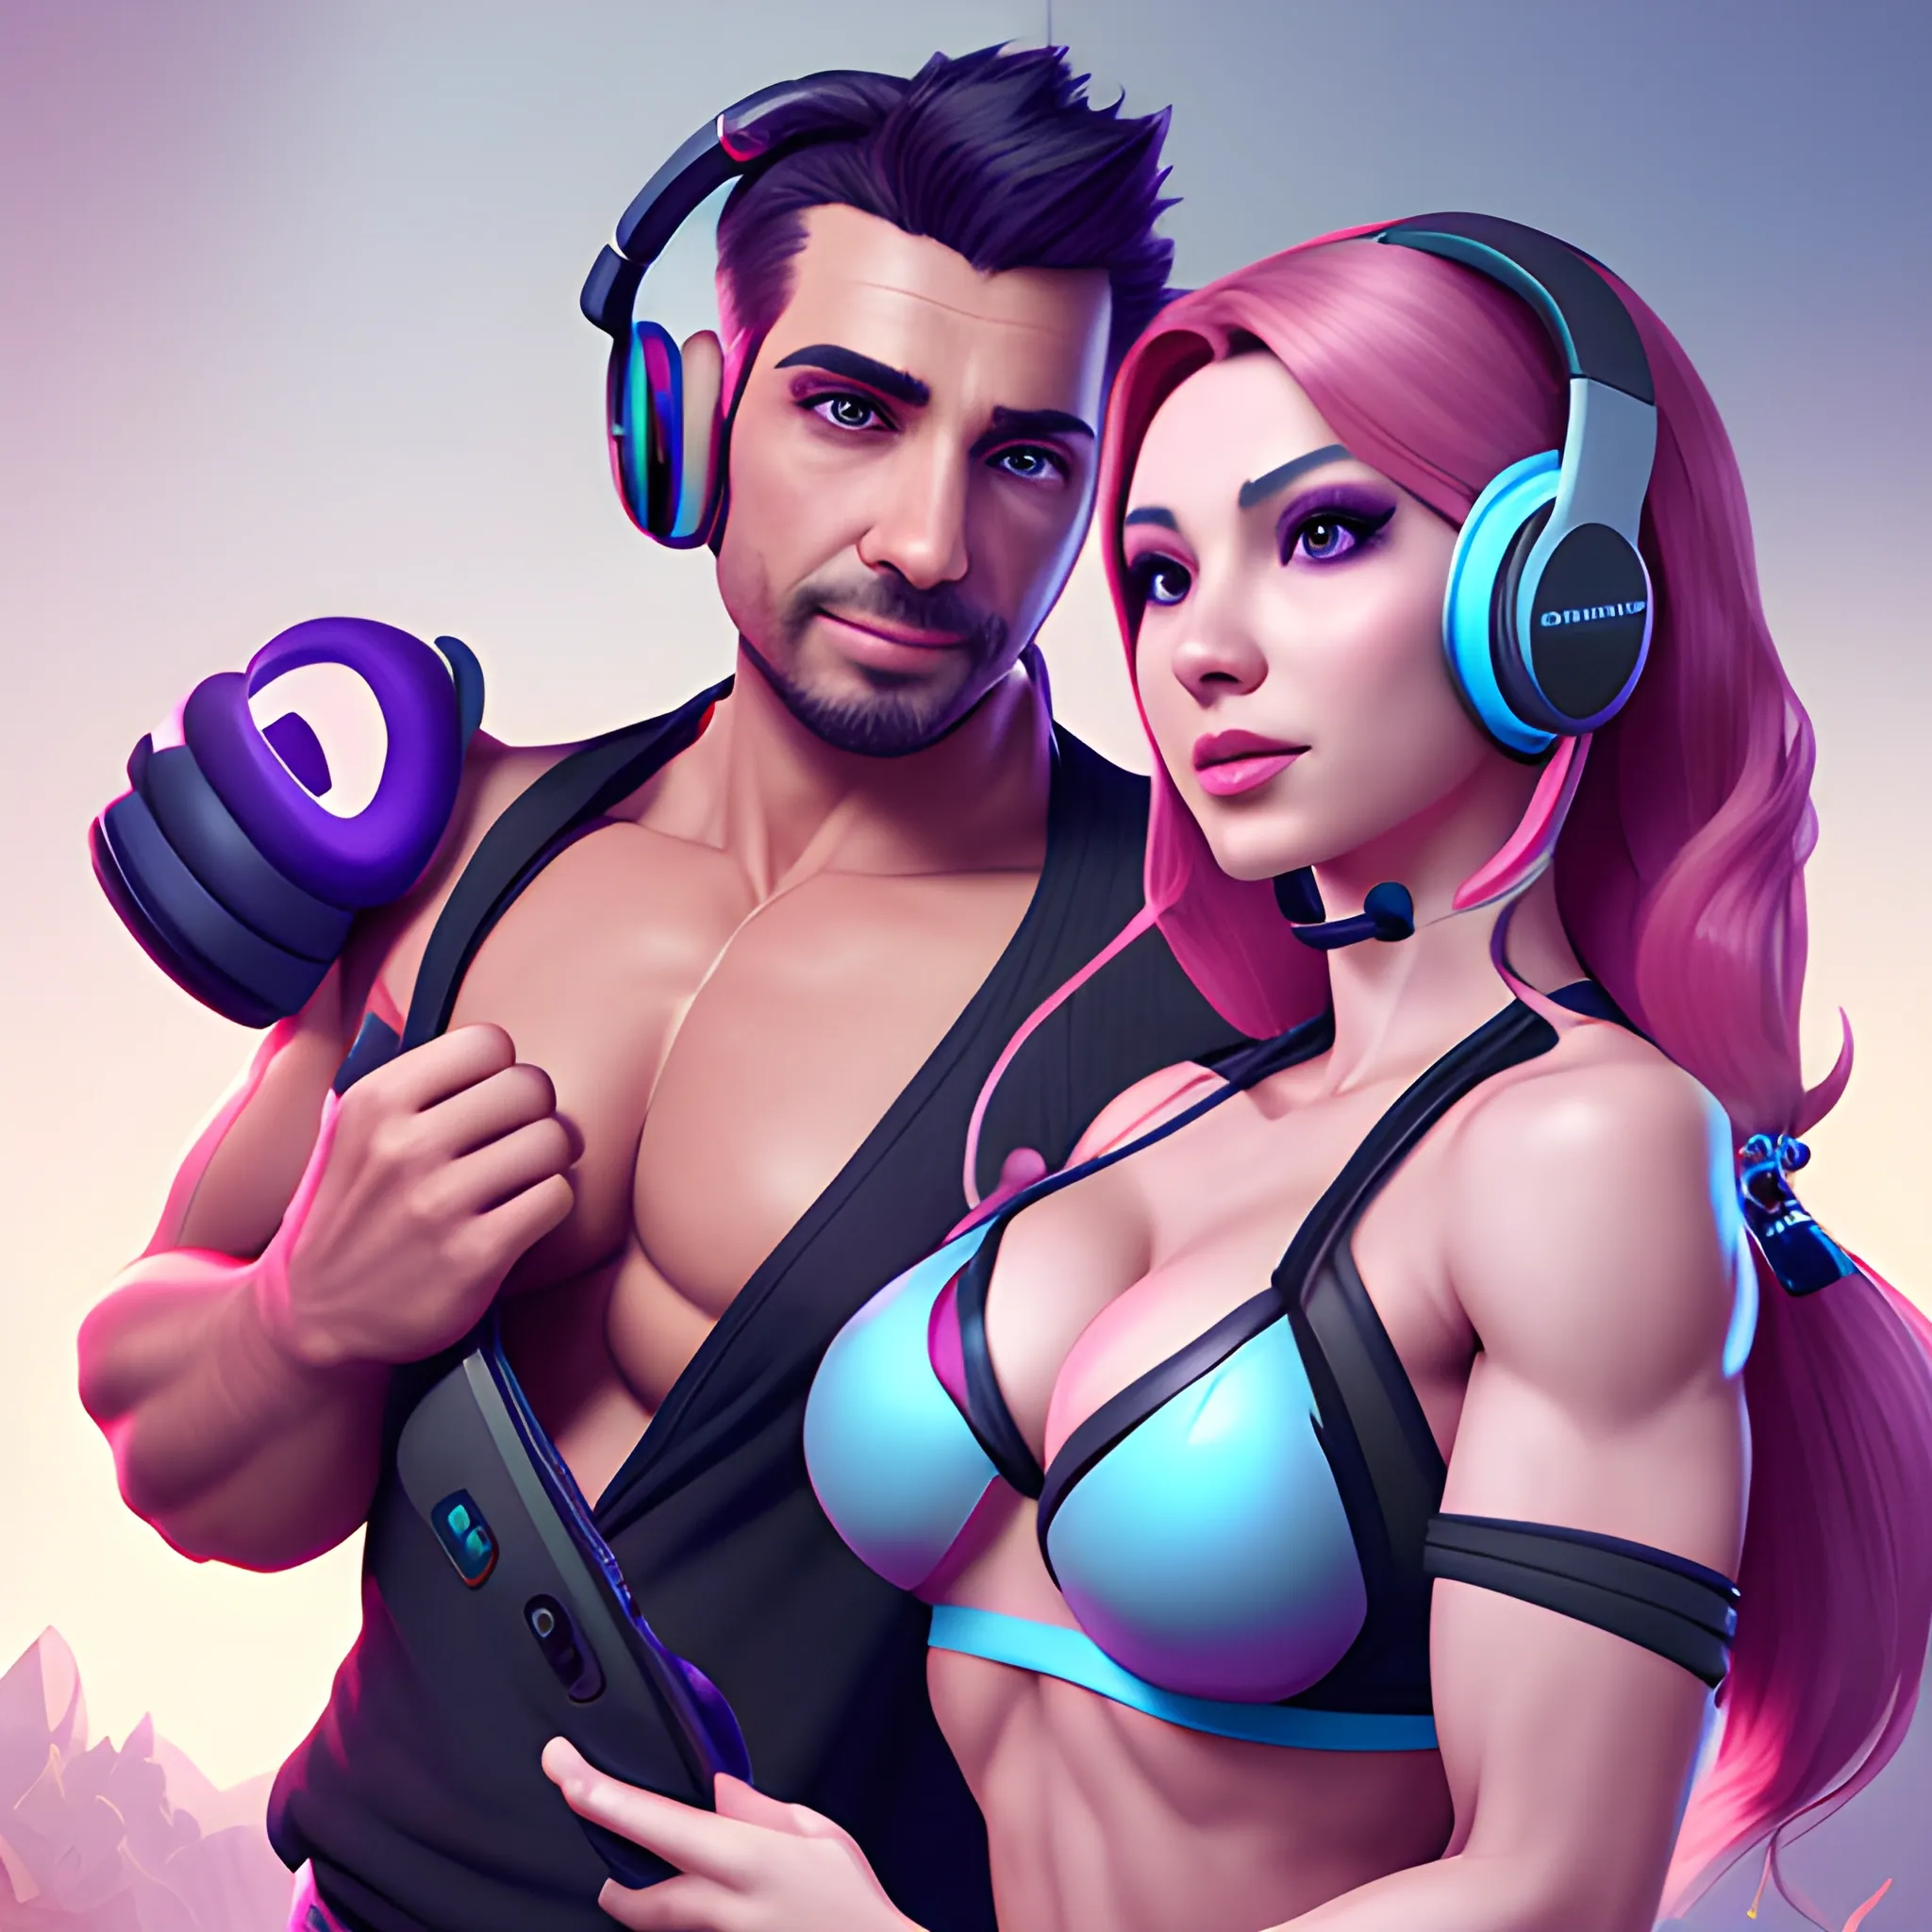 beautiful  streamer with her muscular husband, attractive gaming headphones , they have PS5 controller in their hands, breasty, fantasy concept art, 4k resolution,